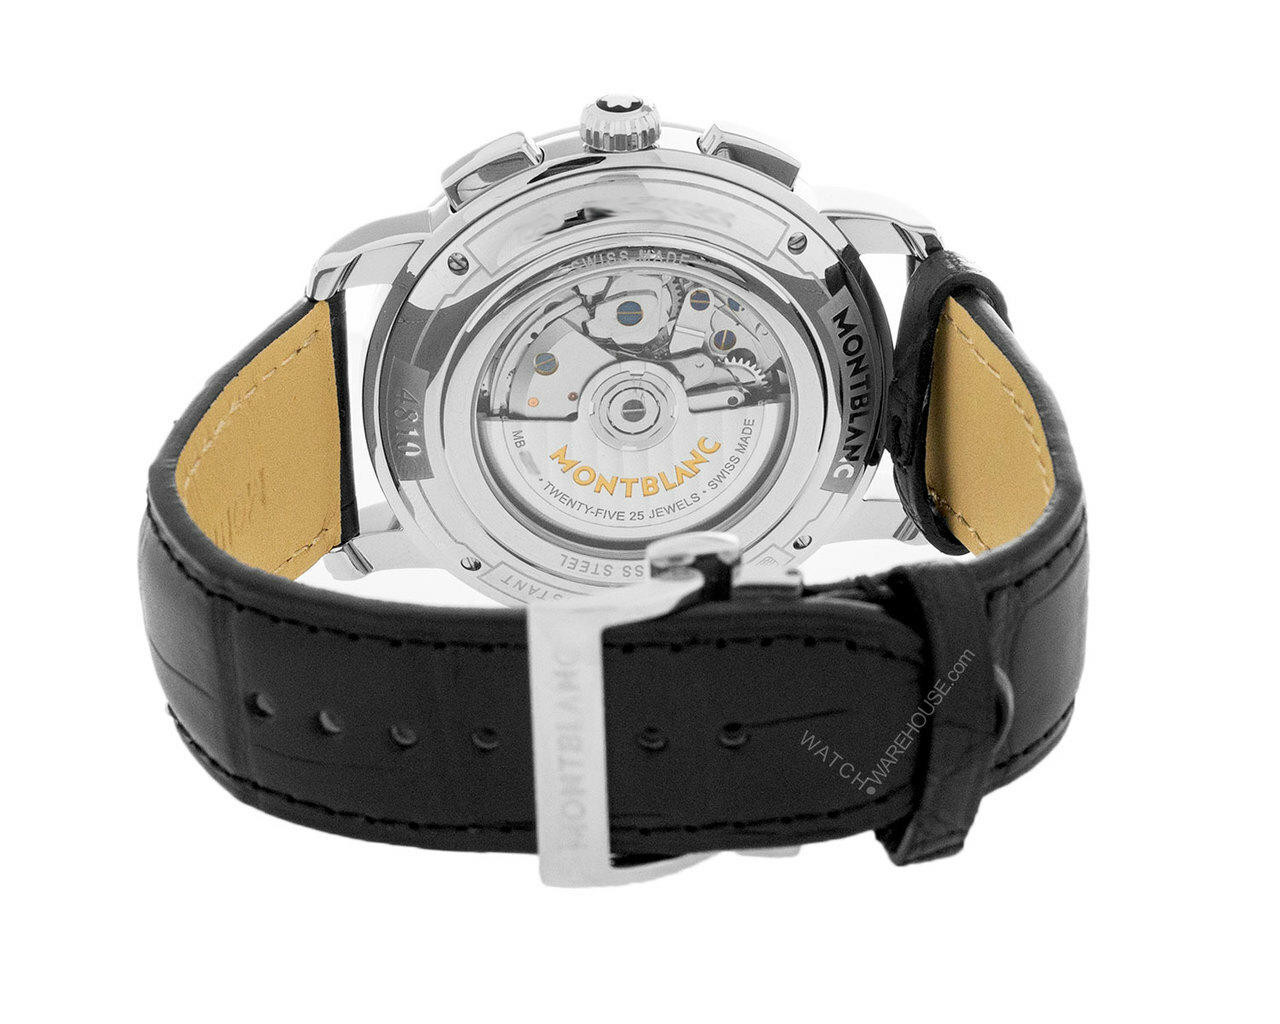 Montblanc Chronograph| Fast and Free US Shipping | Watch Warehouse